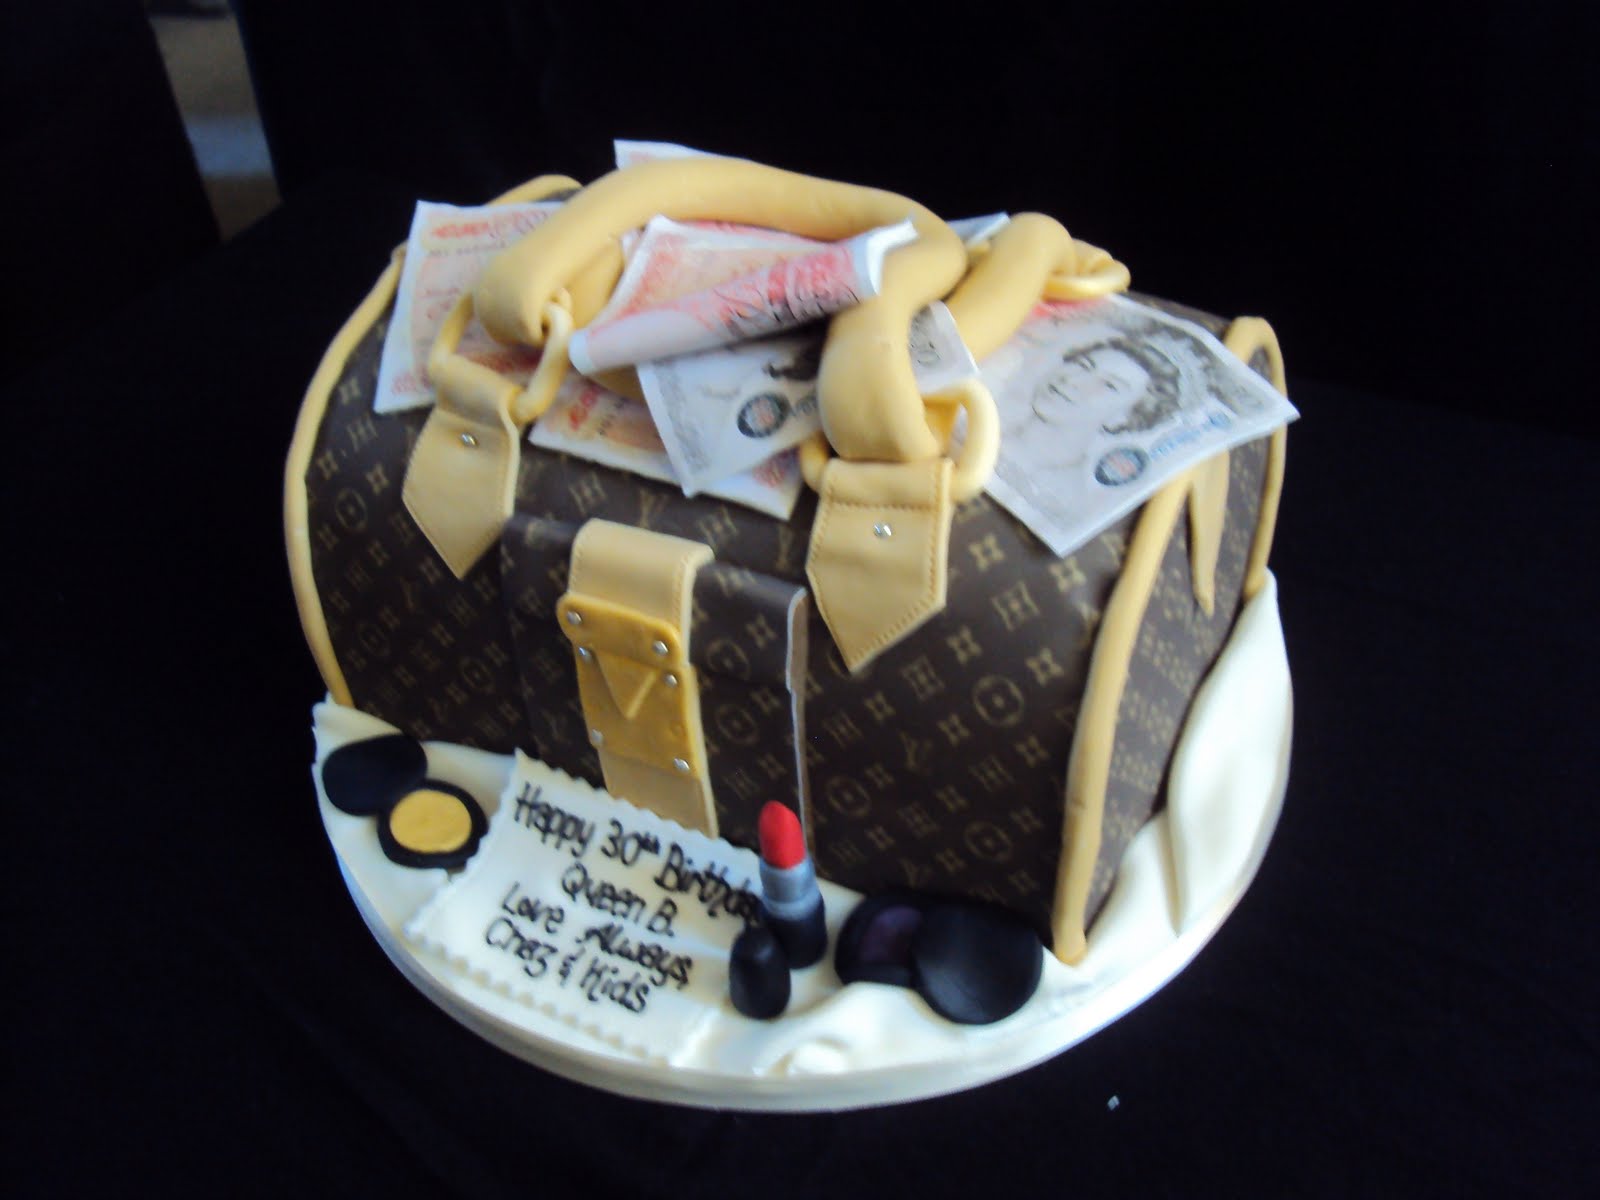 MIMI TO YOU - SWEET AND STYLISH CAKES: Louis Vuitton Speedy Bag Full of Money and Make up